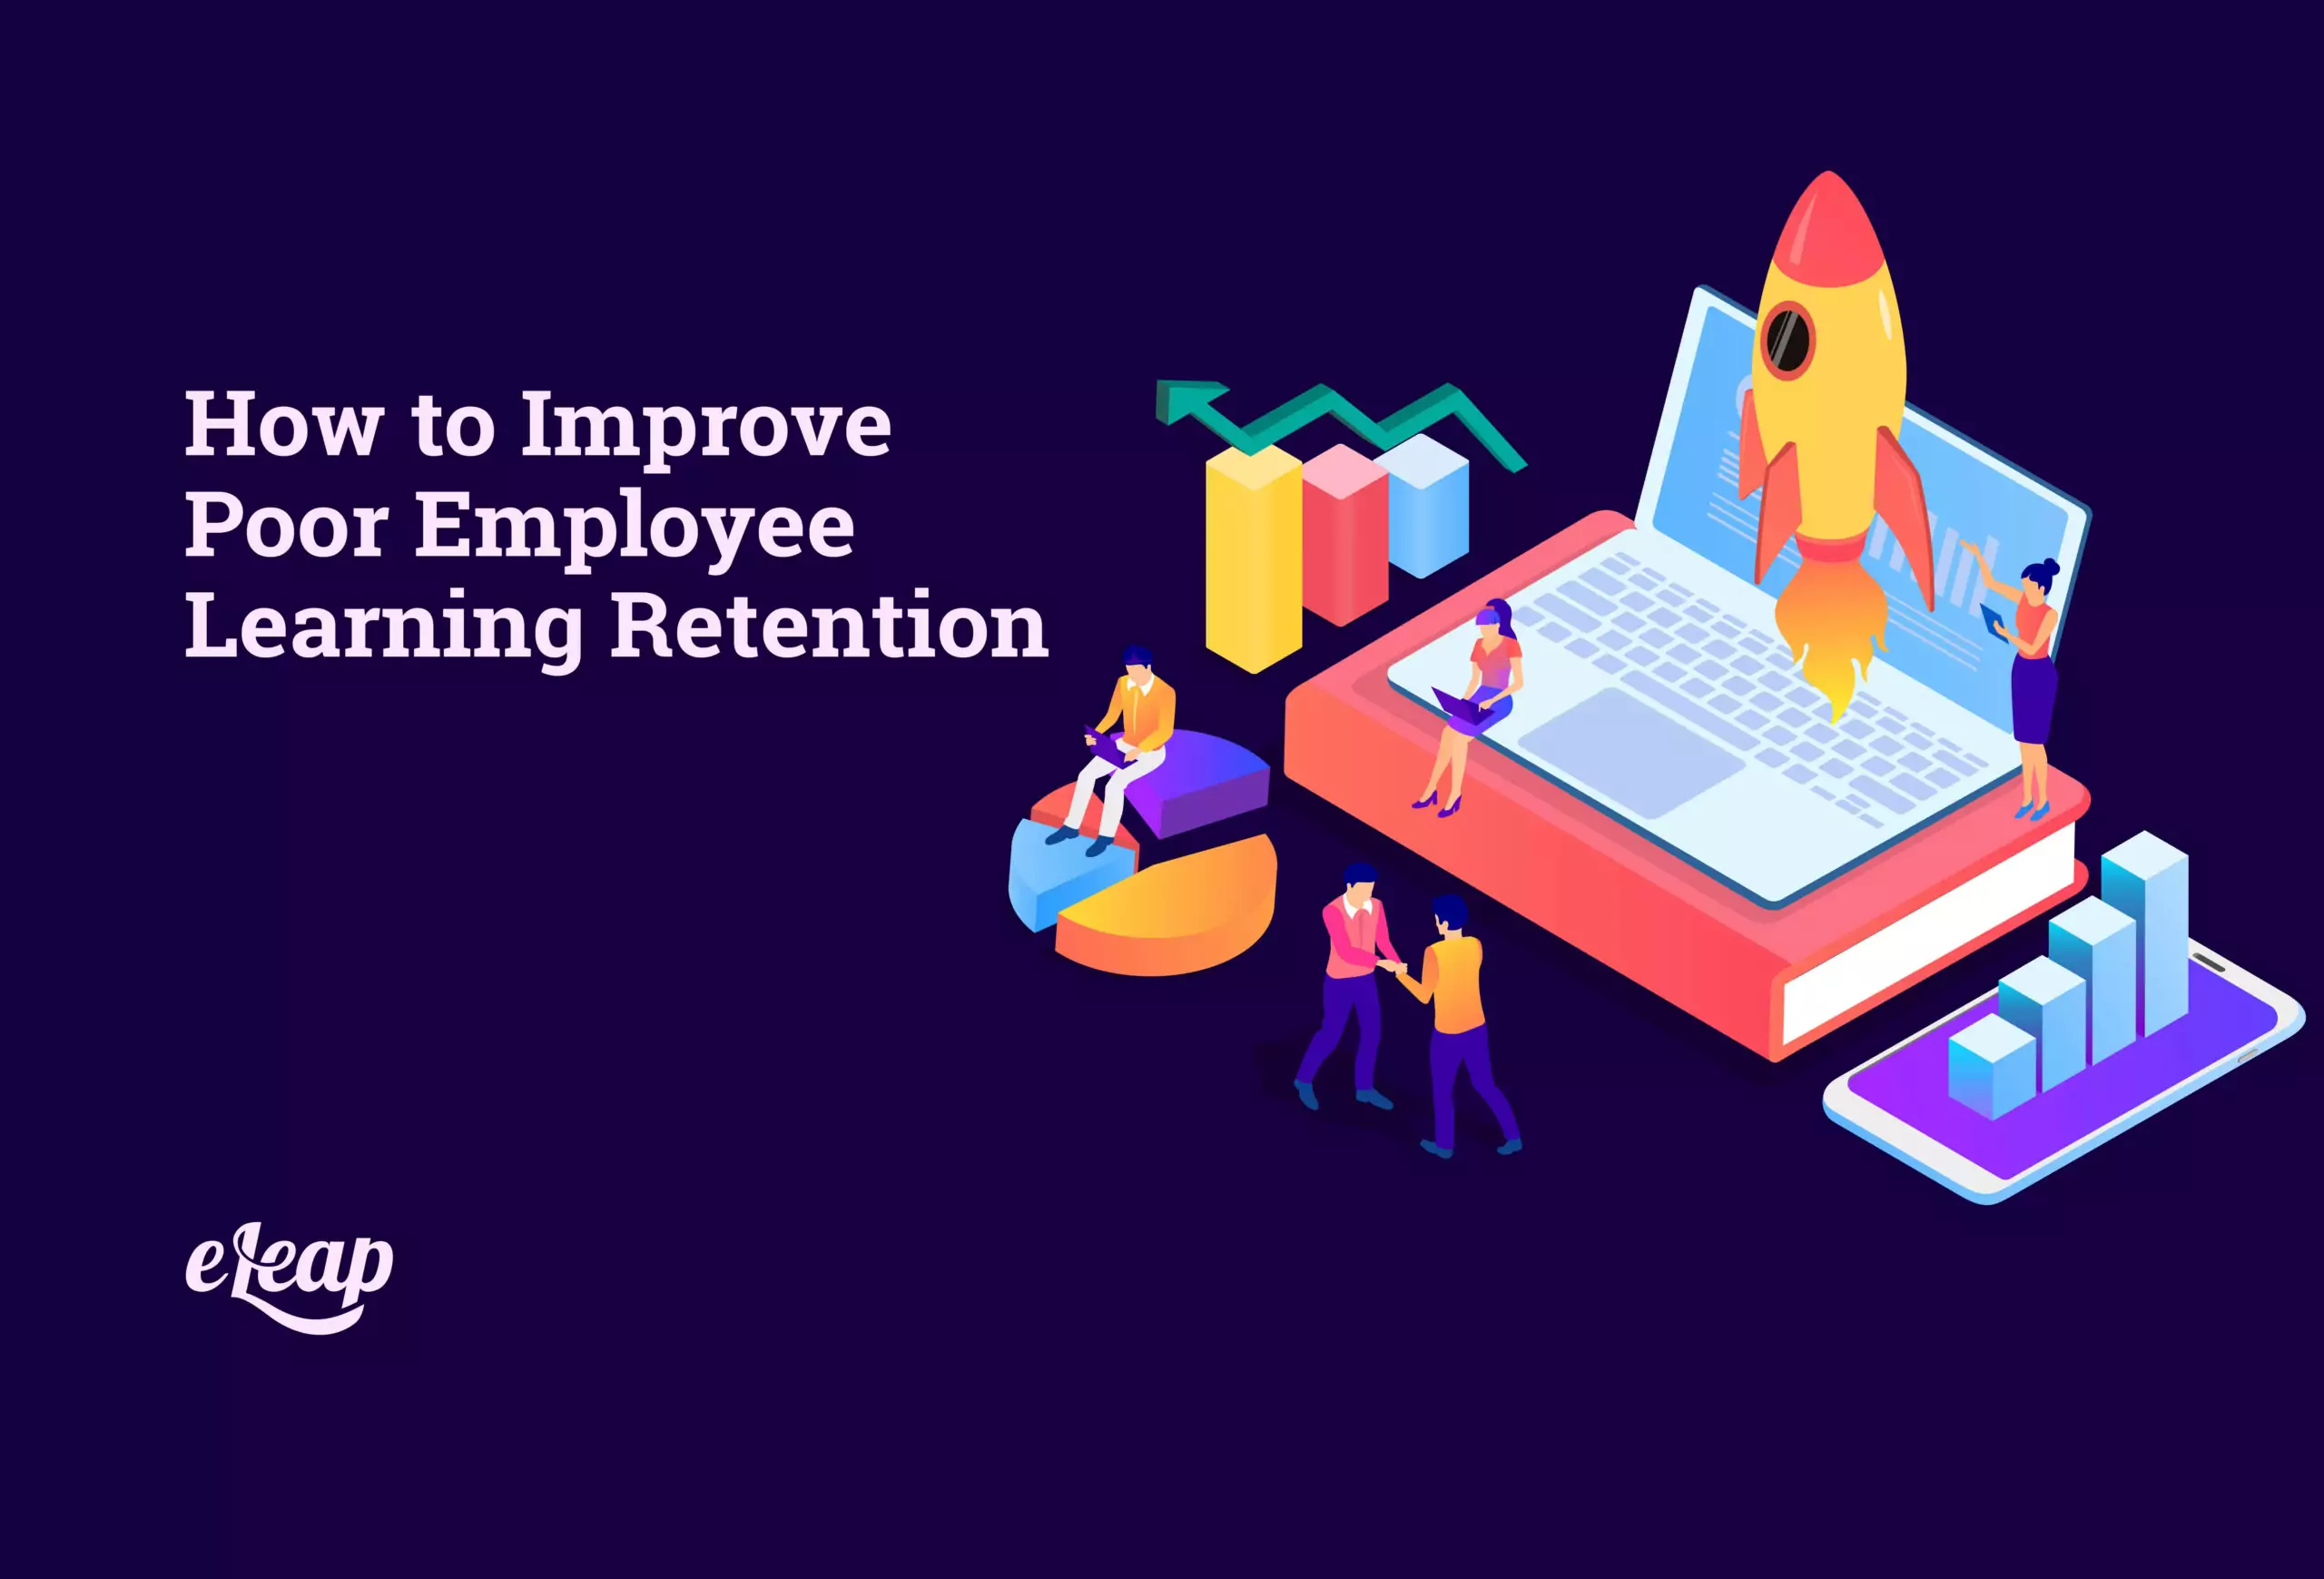 How to Improve Poor Employee Learning Retention